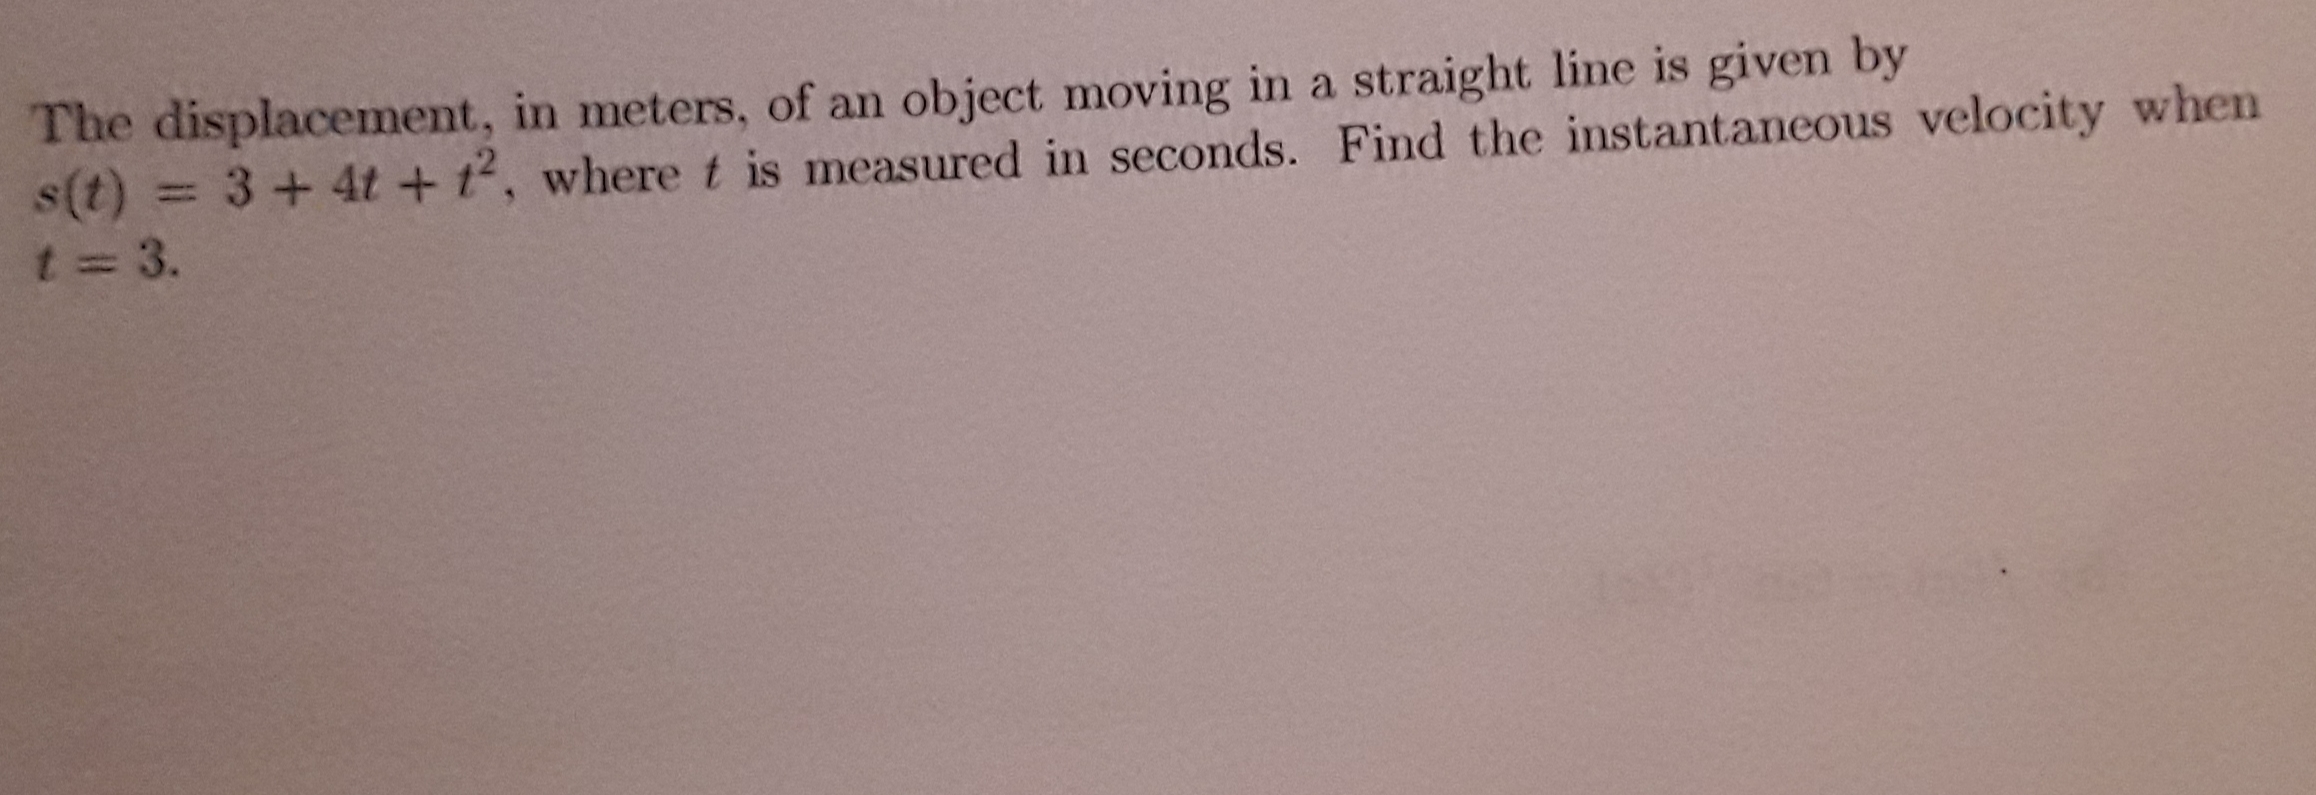 The displacement, in meters, of an object moving in a straight line is given by
s(t) = 3+ 4t +t2, wheret is measured in seconds. Find the instantaneous velocity when
t 3.
